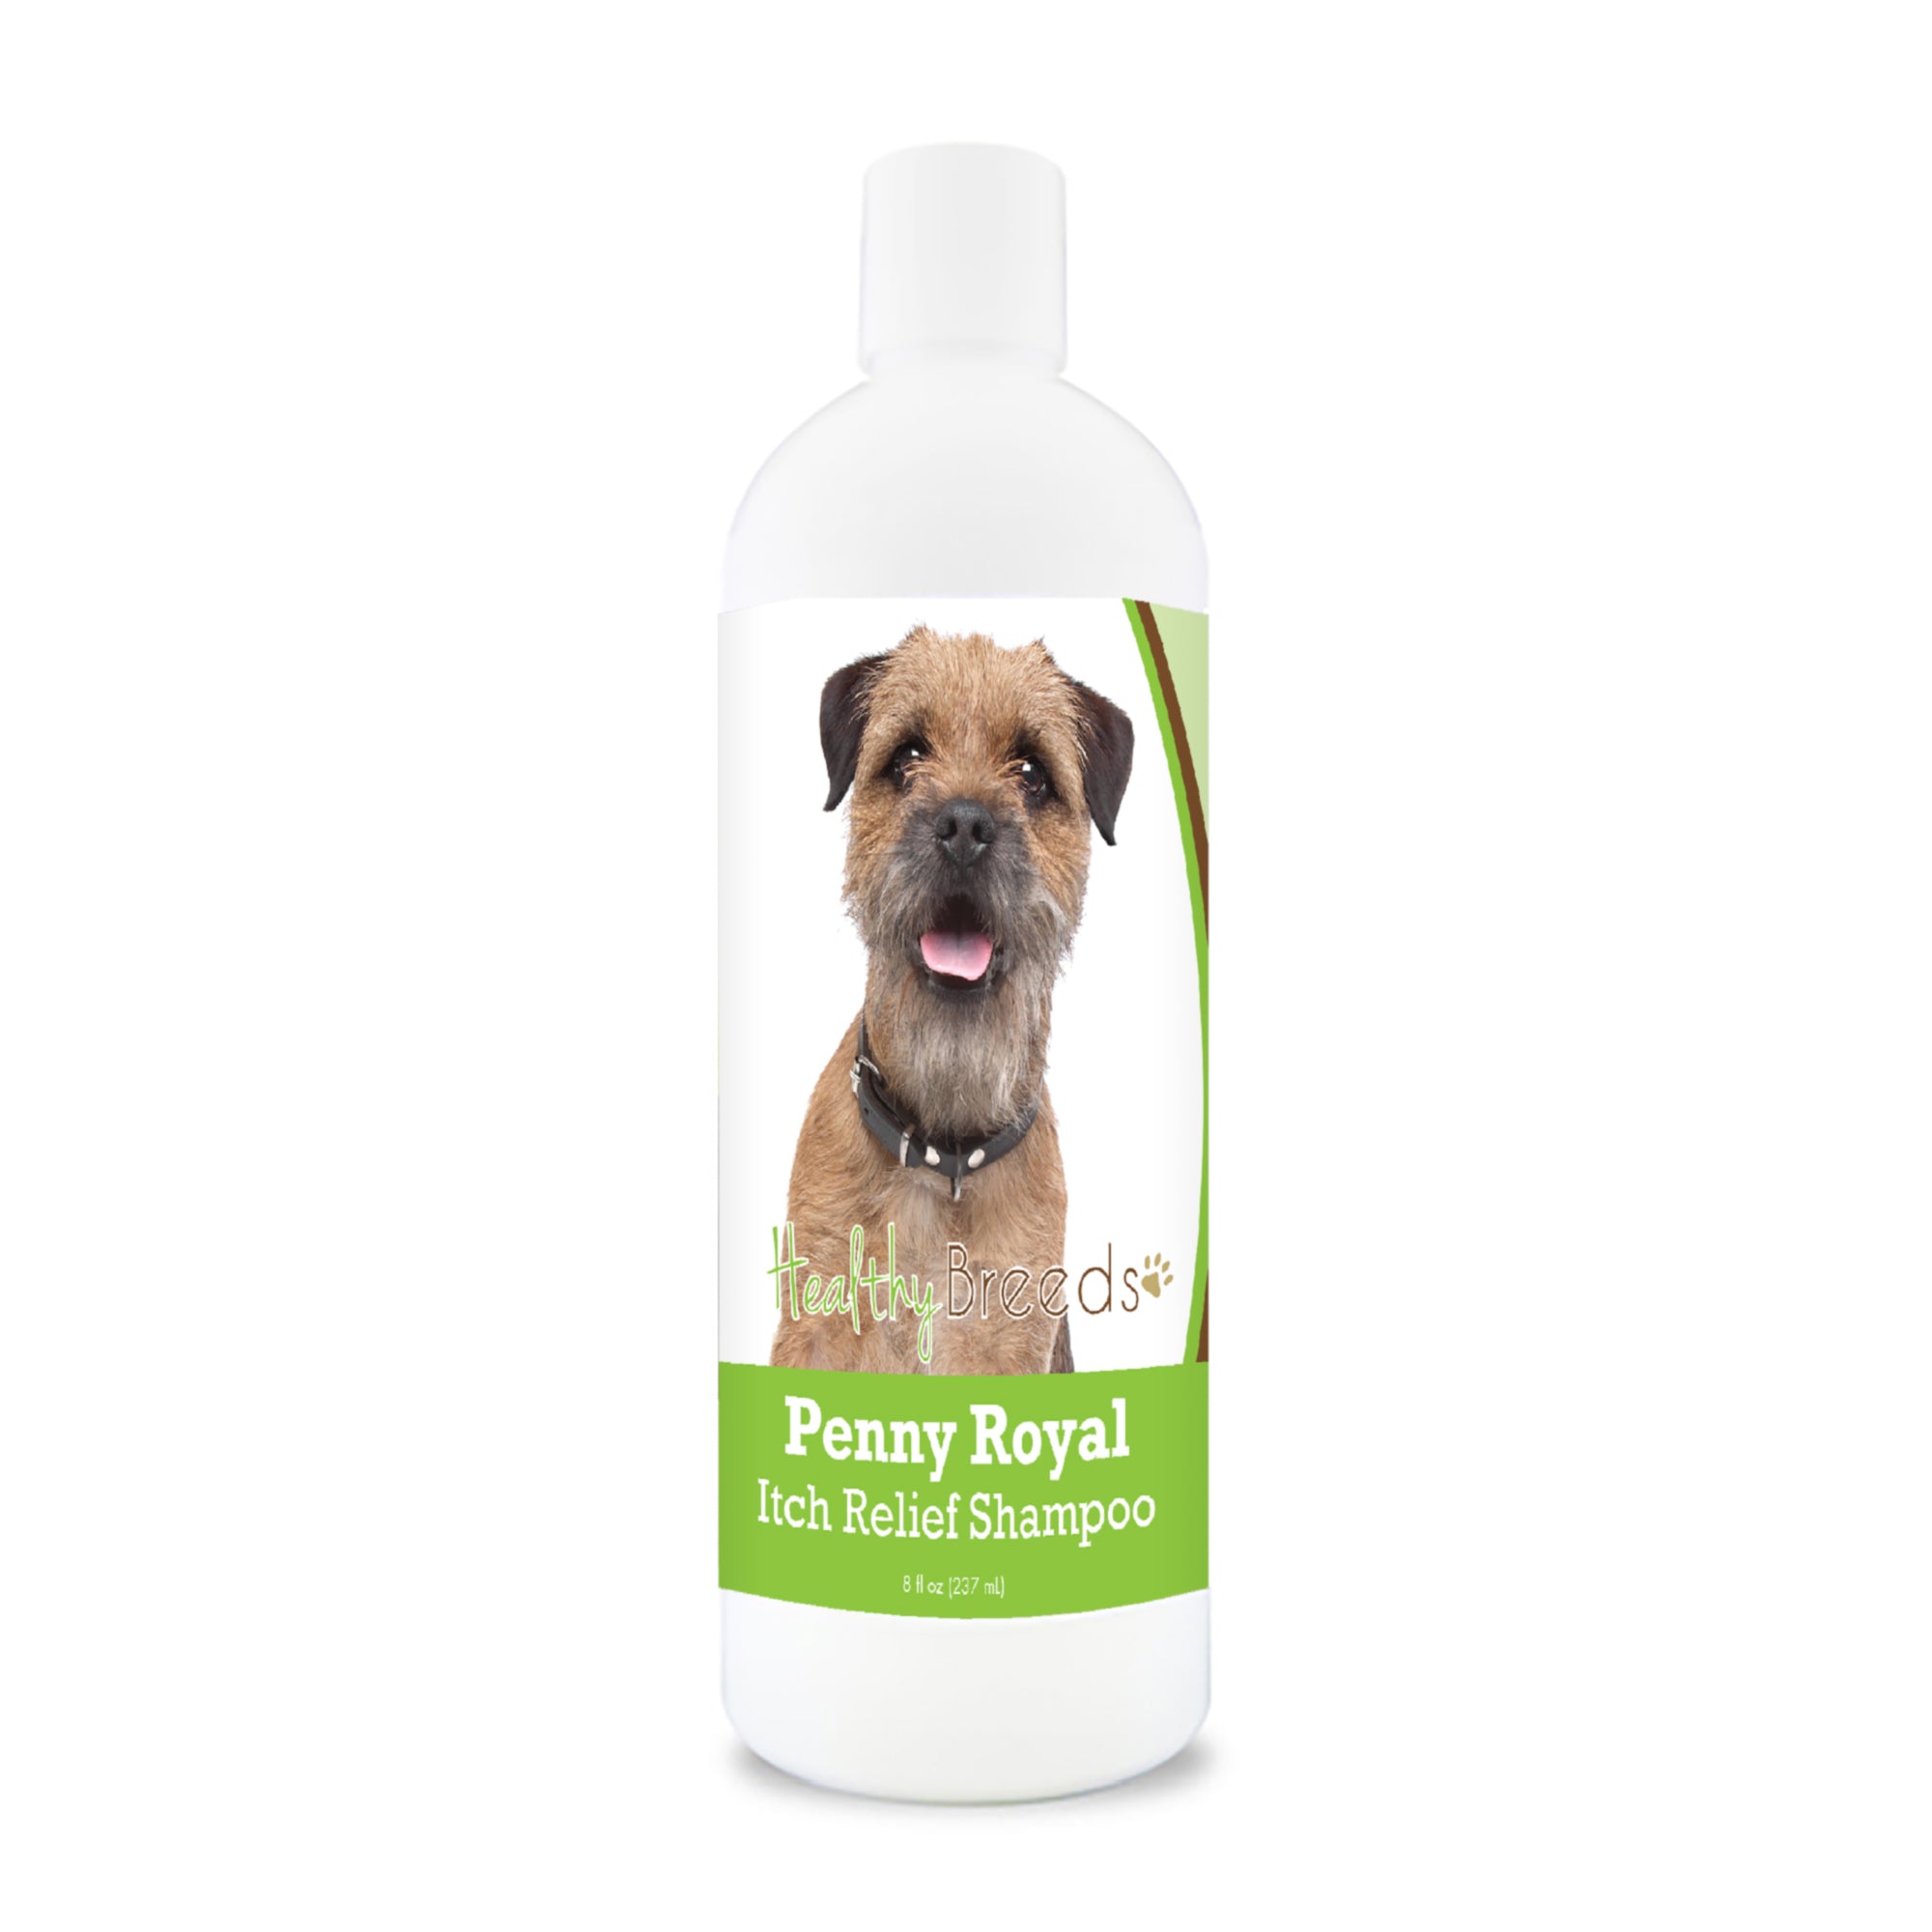 Border Terrier Penny Royal Itch Relief Shampoo 8 oz